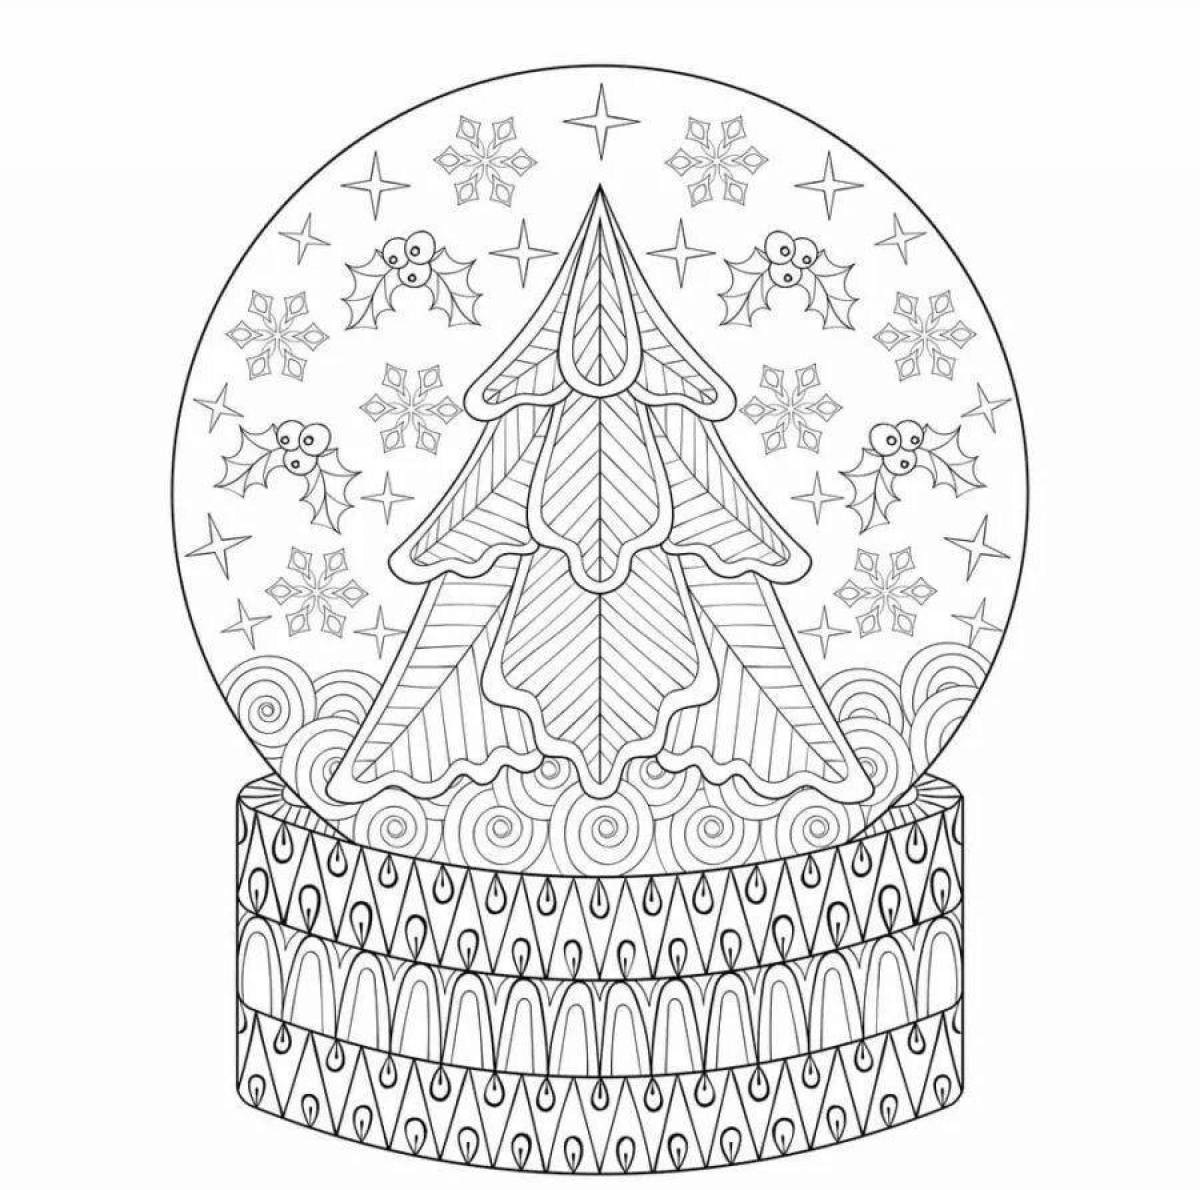 Coloring book exquisite Christmas tree toy made of glass